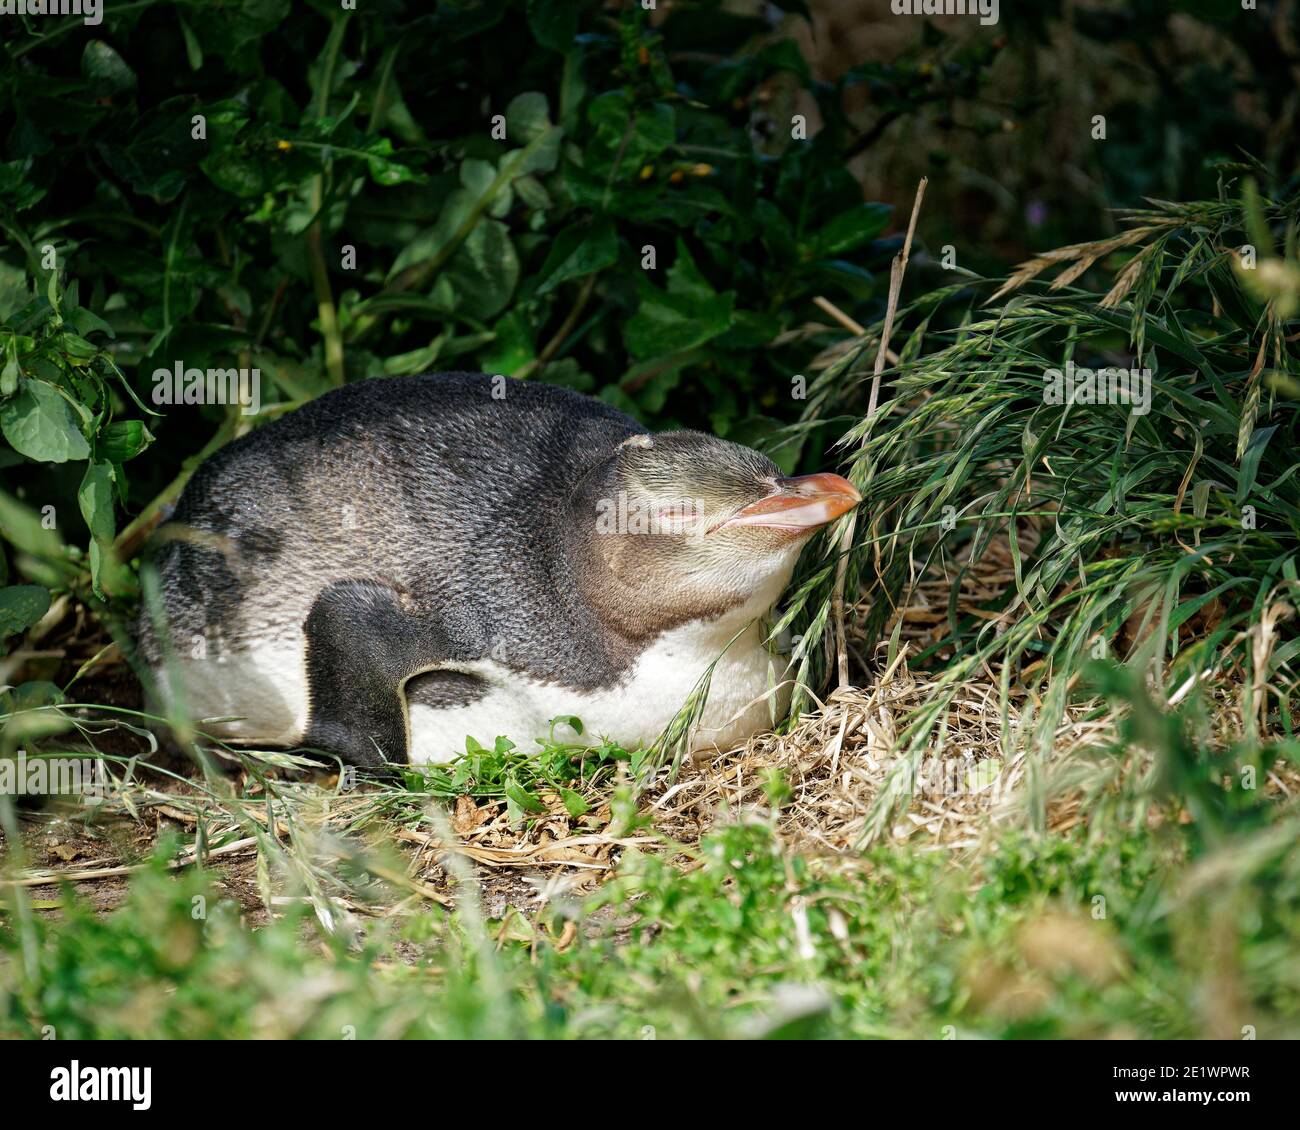 A baby yellow-eyed penguin asleep in undergrowth while waiting for a parent to return to feed it, Otago, New Zealand. Stock Photo